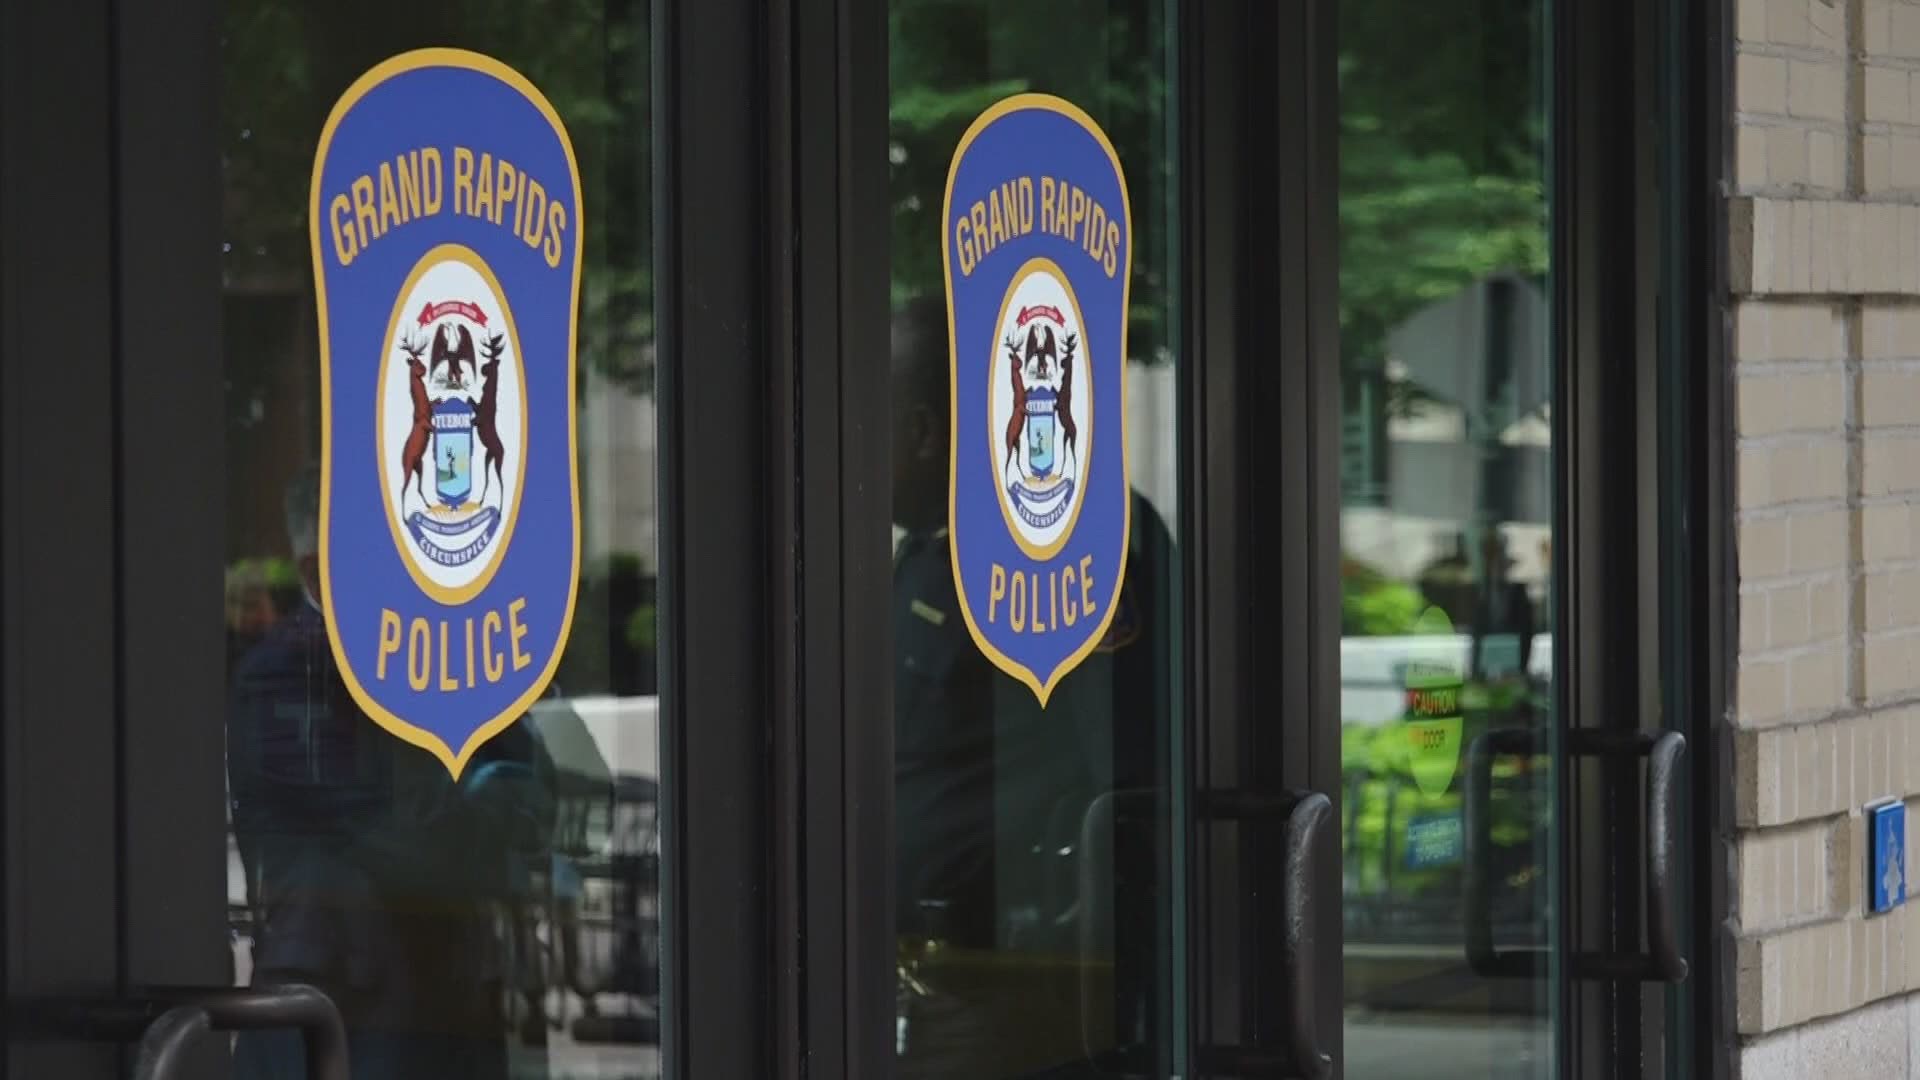 Grand Rapids Police Chief Eric Payne said he initiated an internal affairs investigation after officers confronted a group of demonstrators downtown Sunday evening.